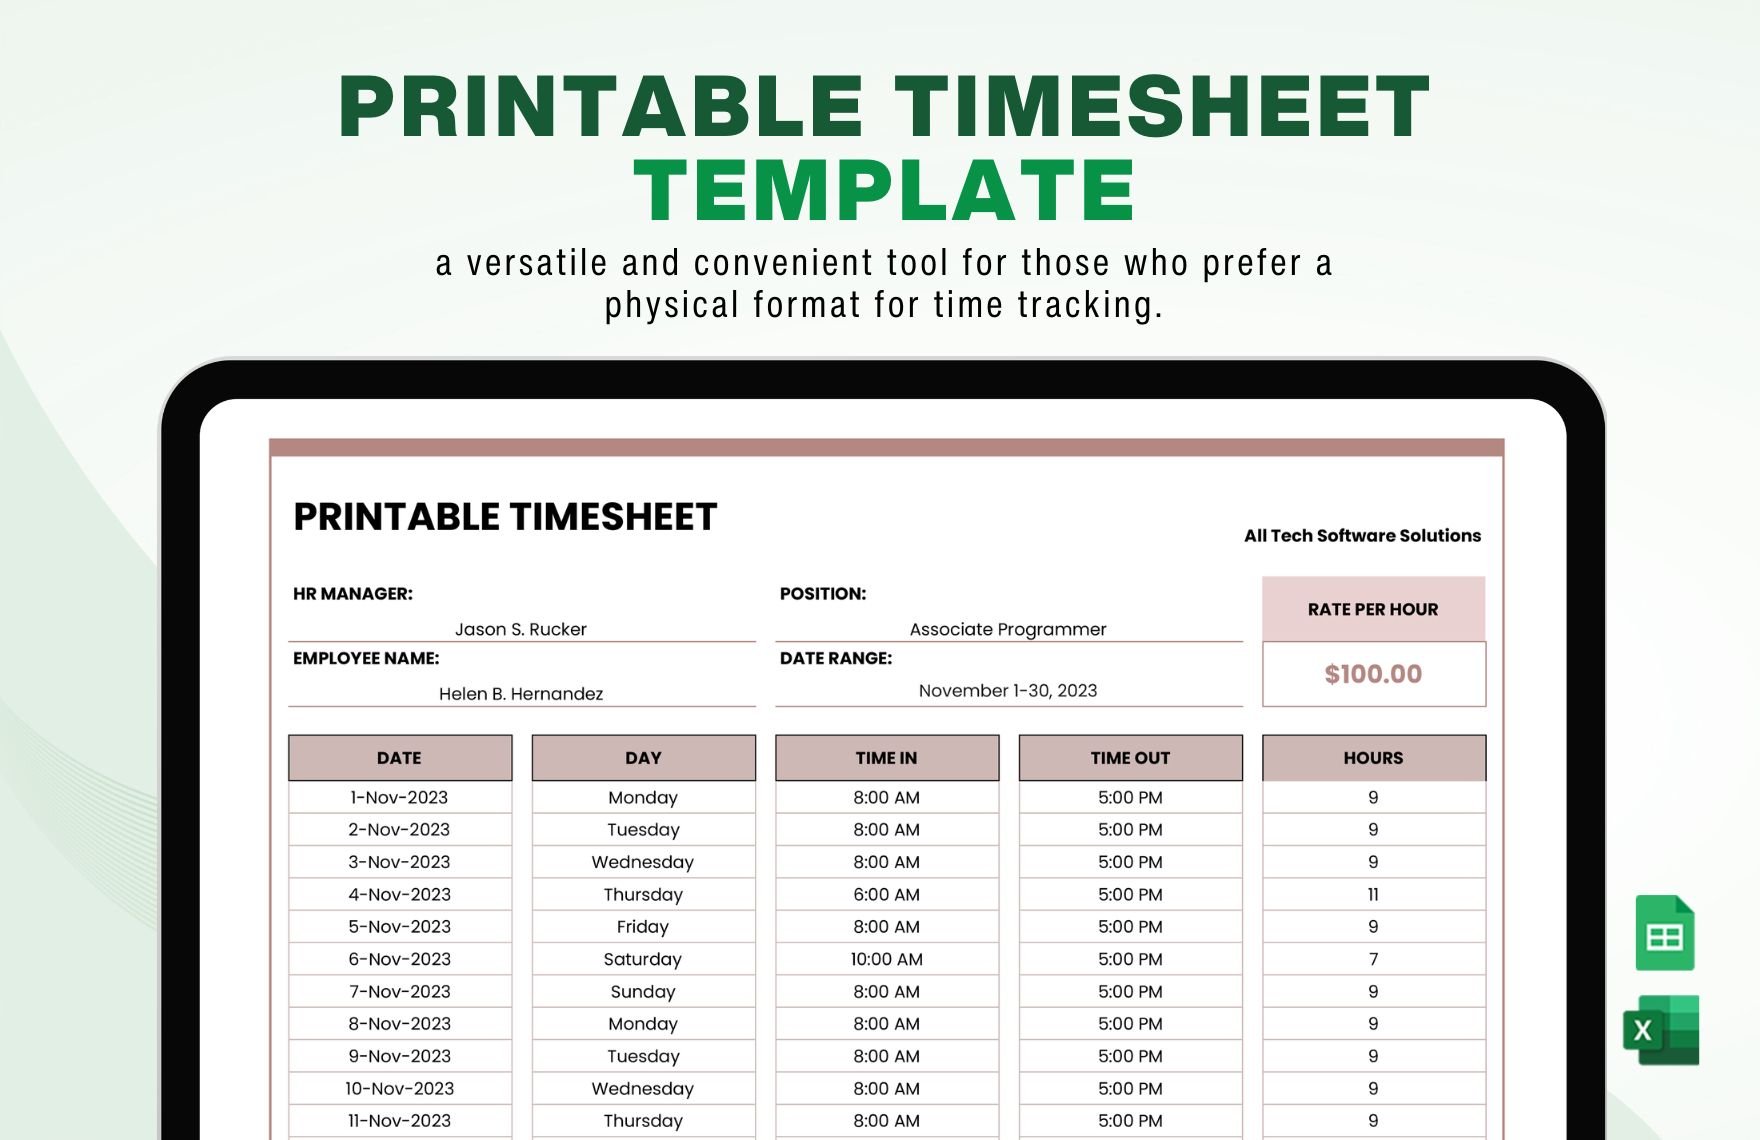 Free Printable Timesheet Template in Excel, Google Sheets